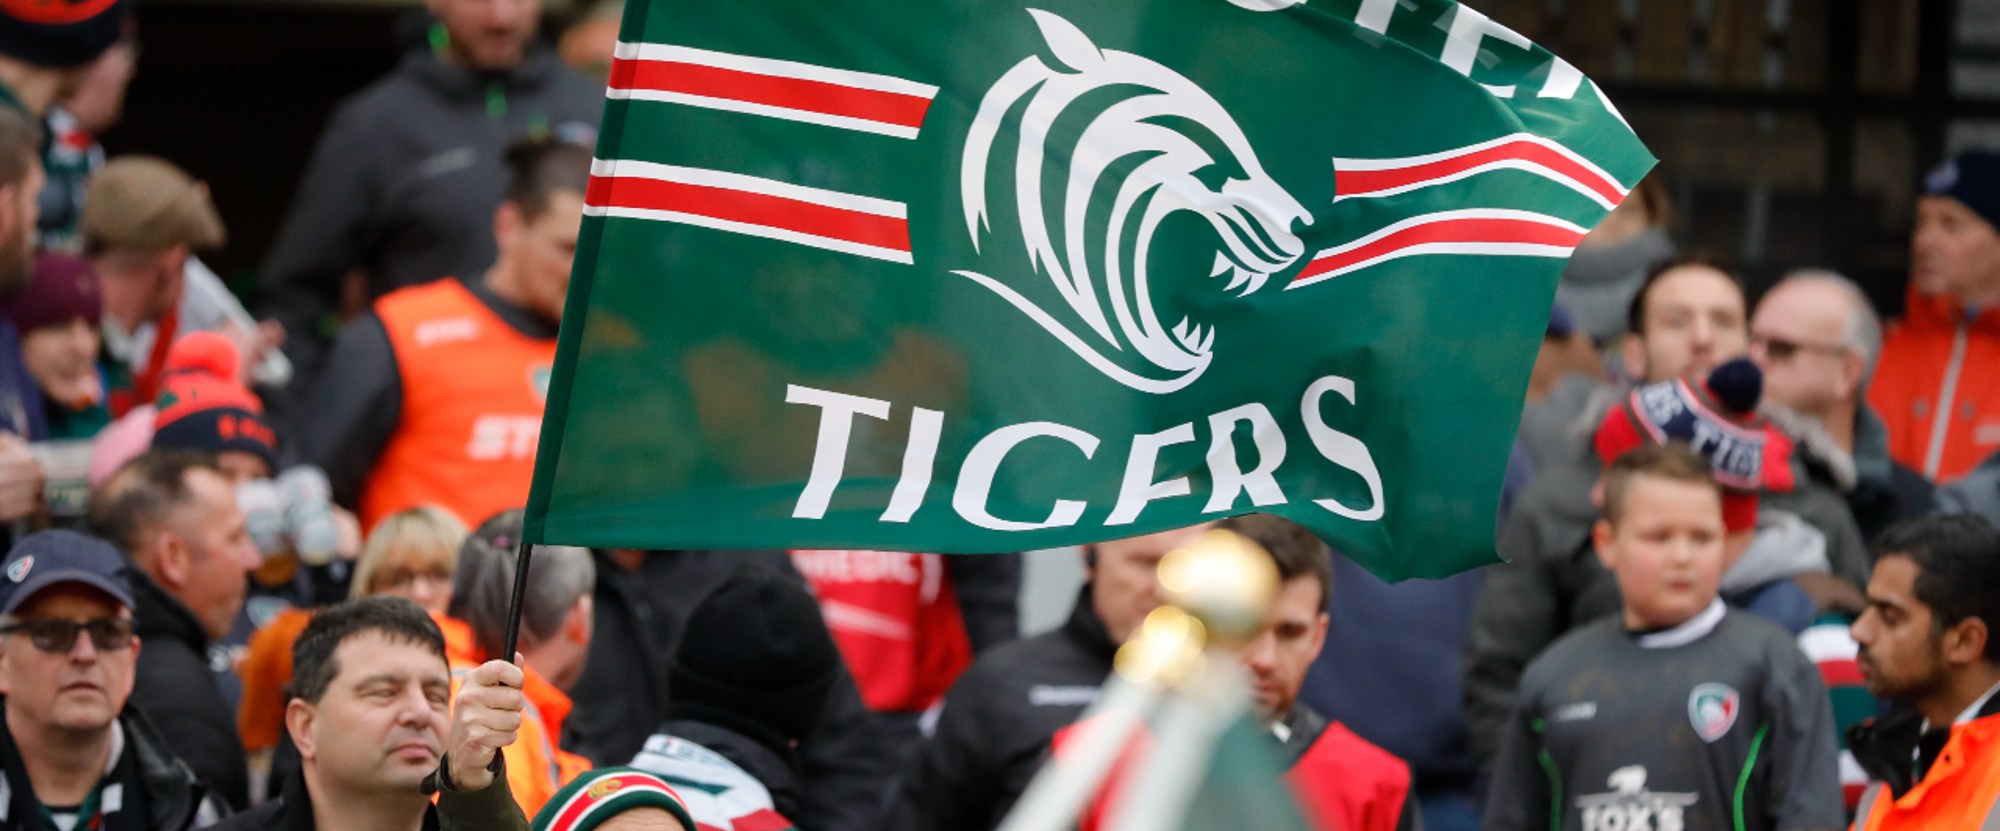 Stade Rochelais v Leicester Tigers - Official Flight and Ticket